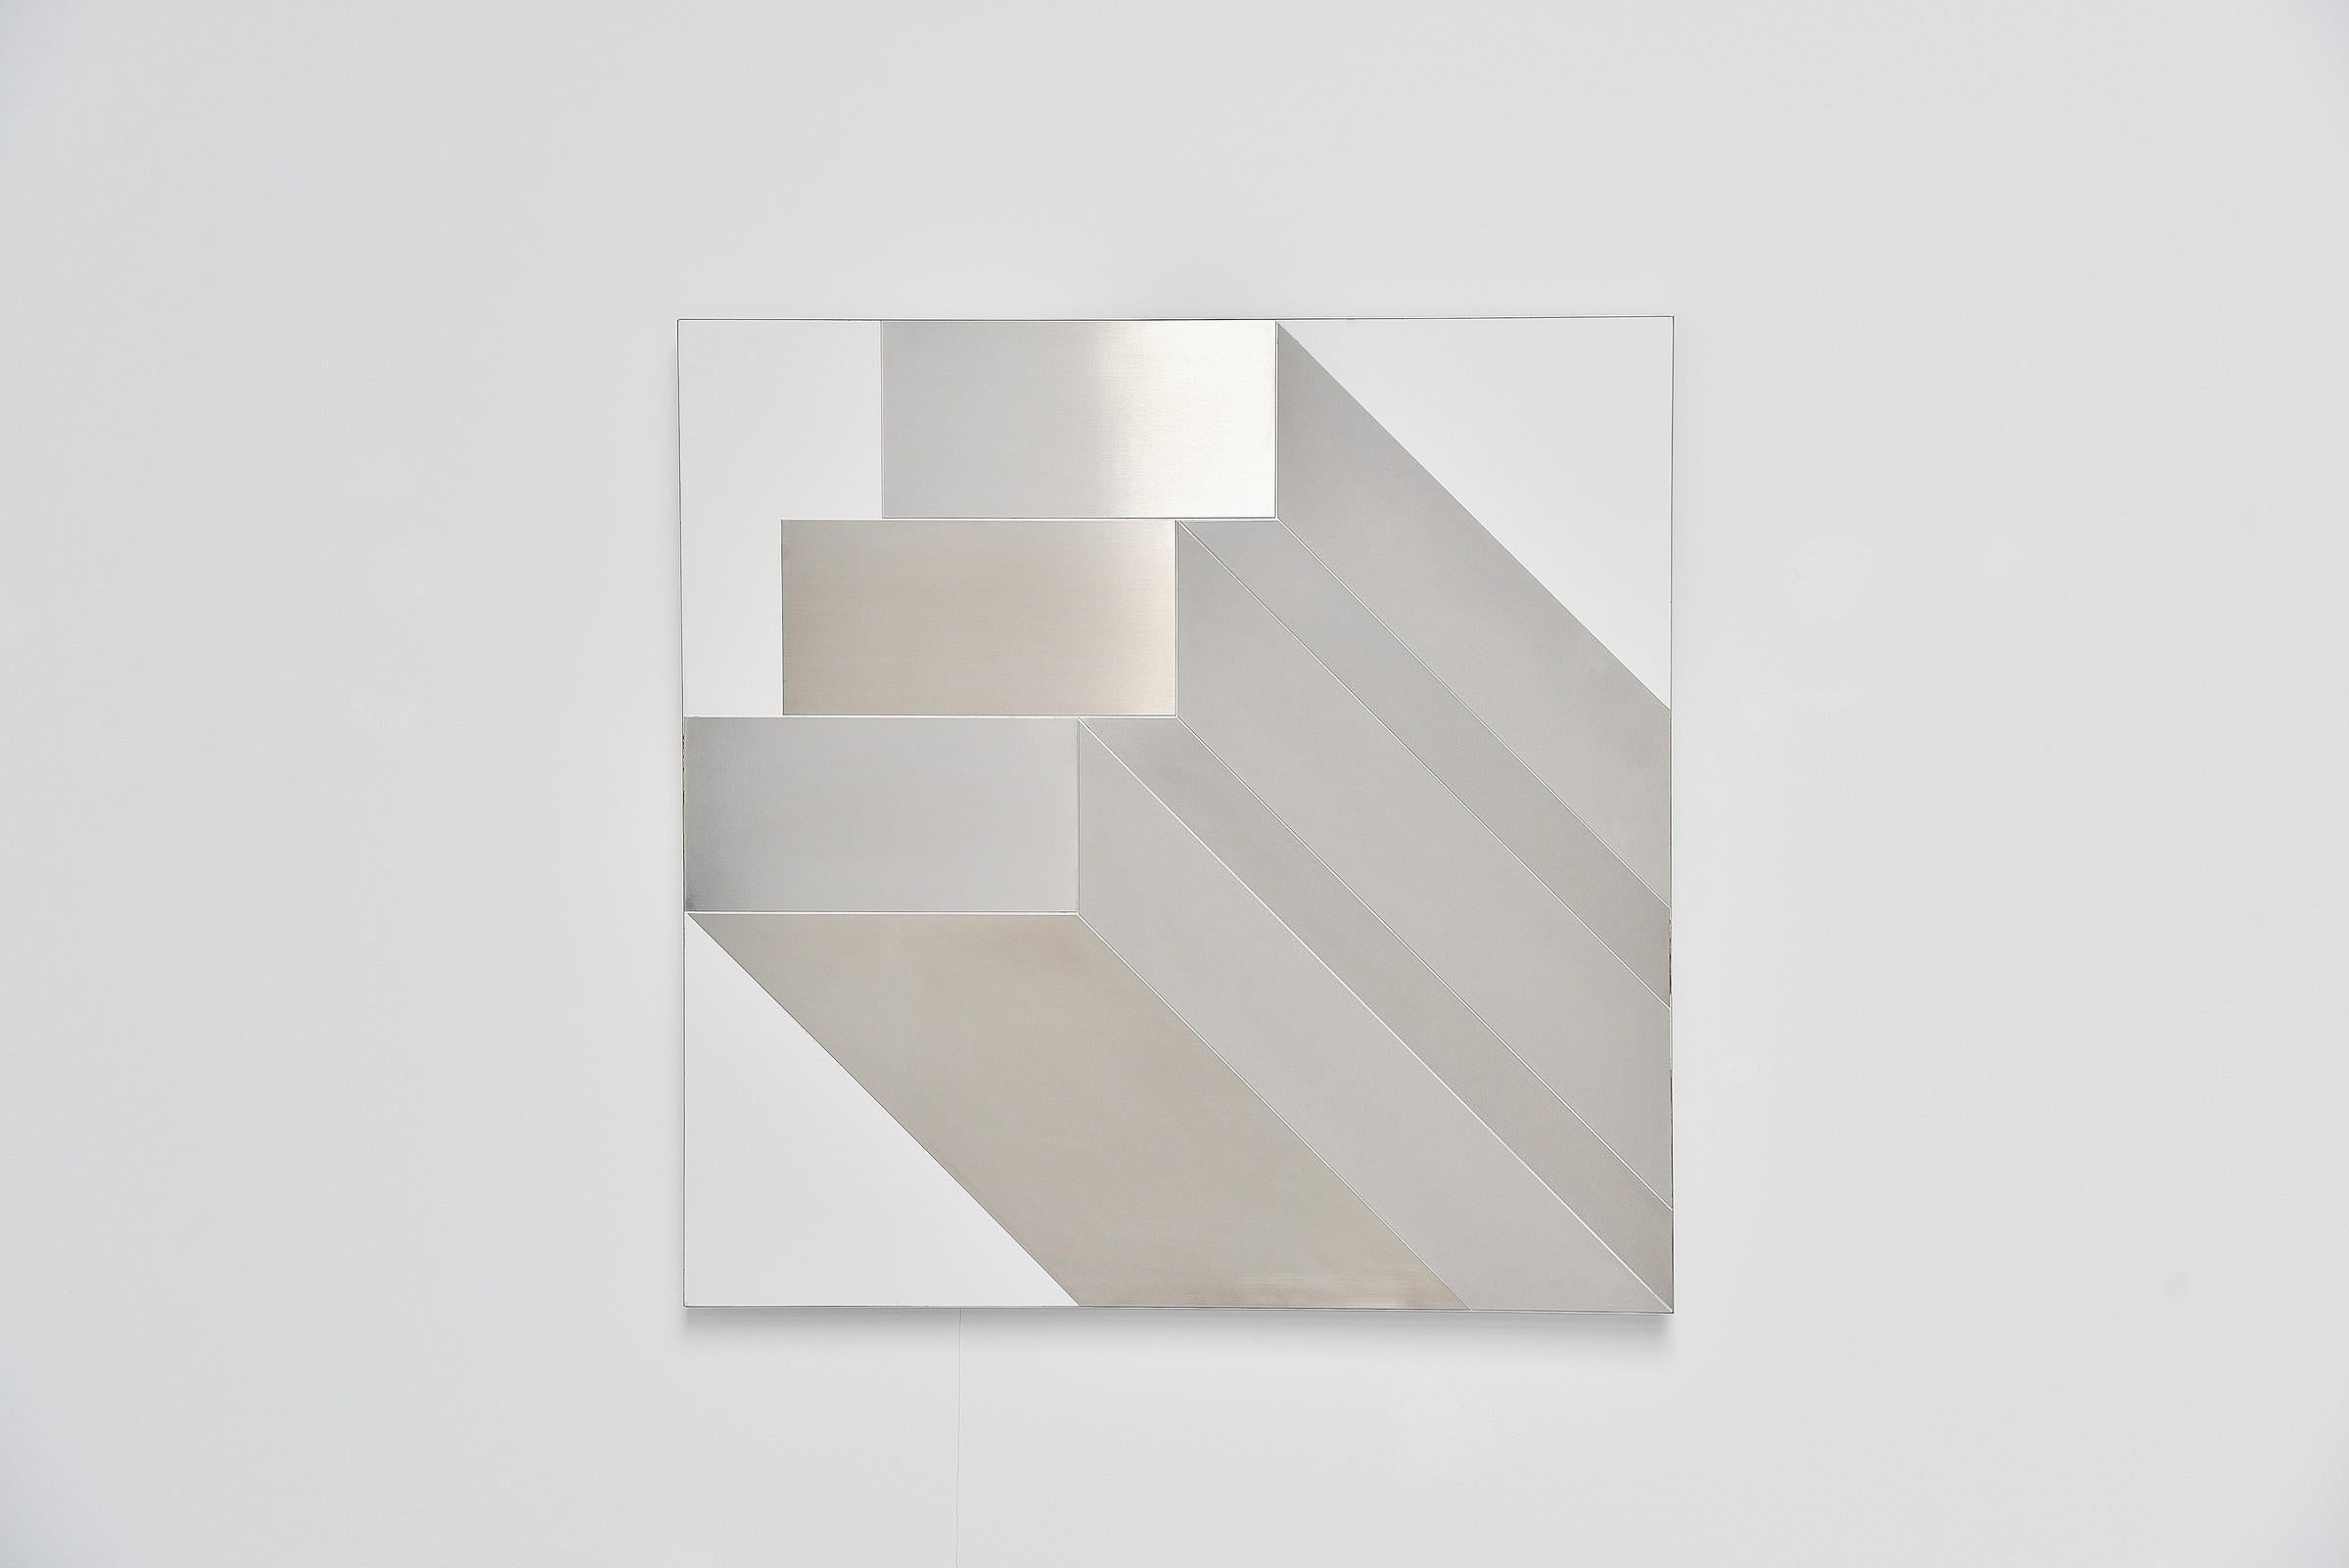 Large abstract modern shaped stainless steel wall artwork designed by Rudolf Wolf and manufactured in his own atelier in 1972. This wall panel is made of white laminated board and has a stainless steel abstract configuration on it. This artwork is 1